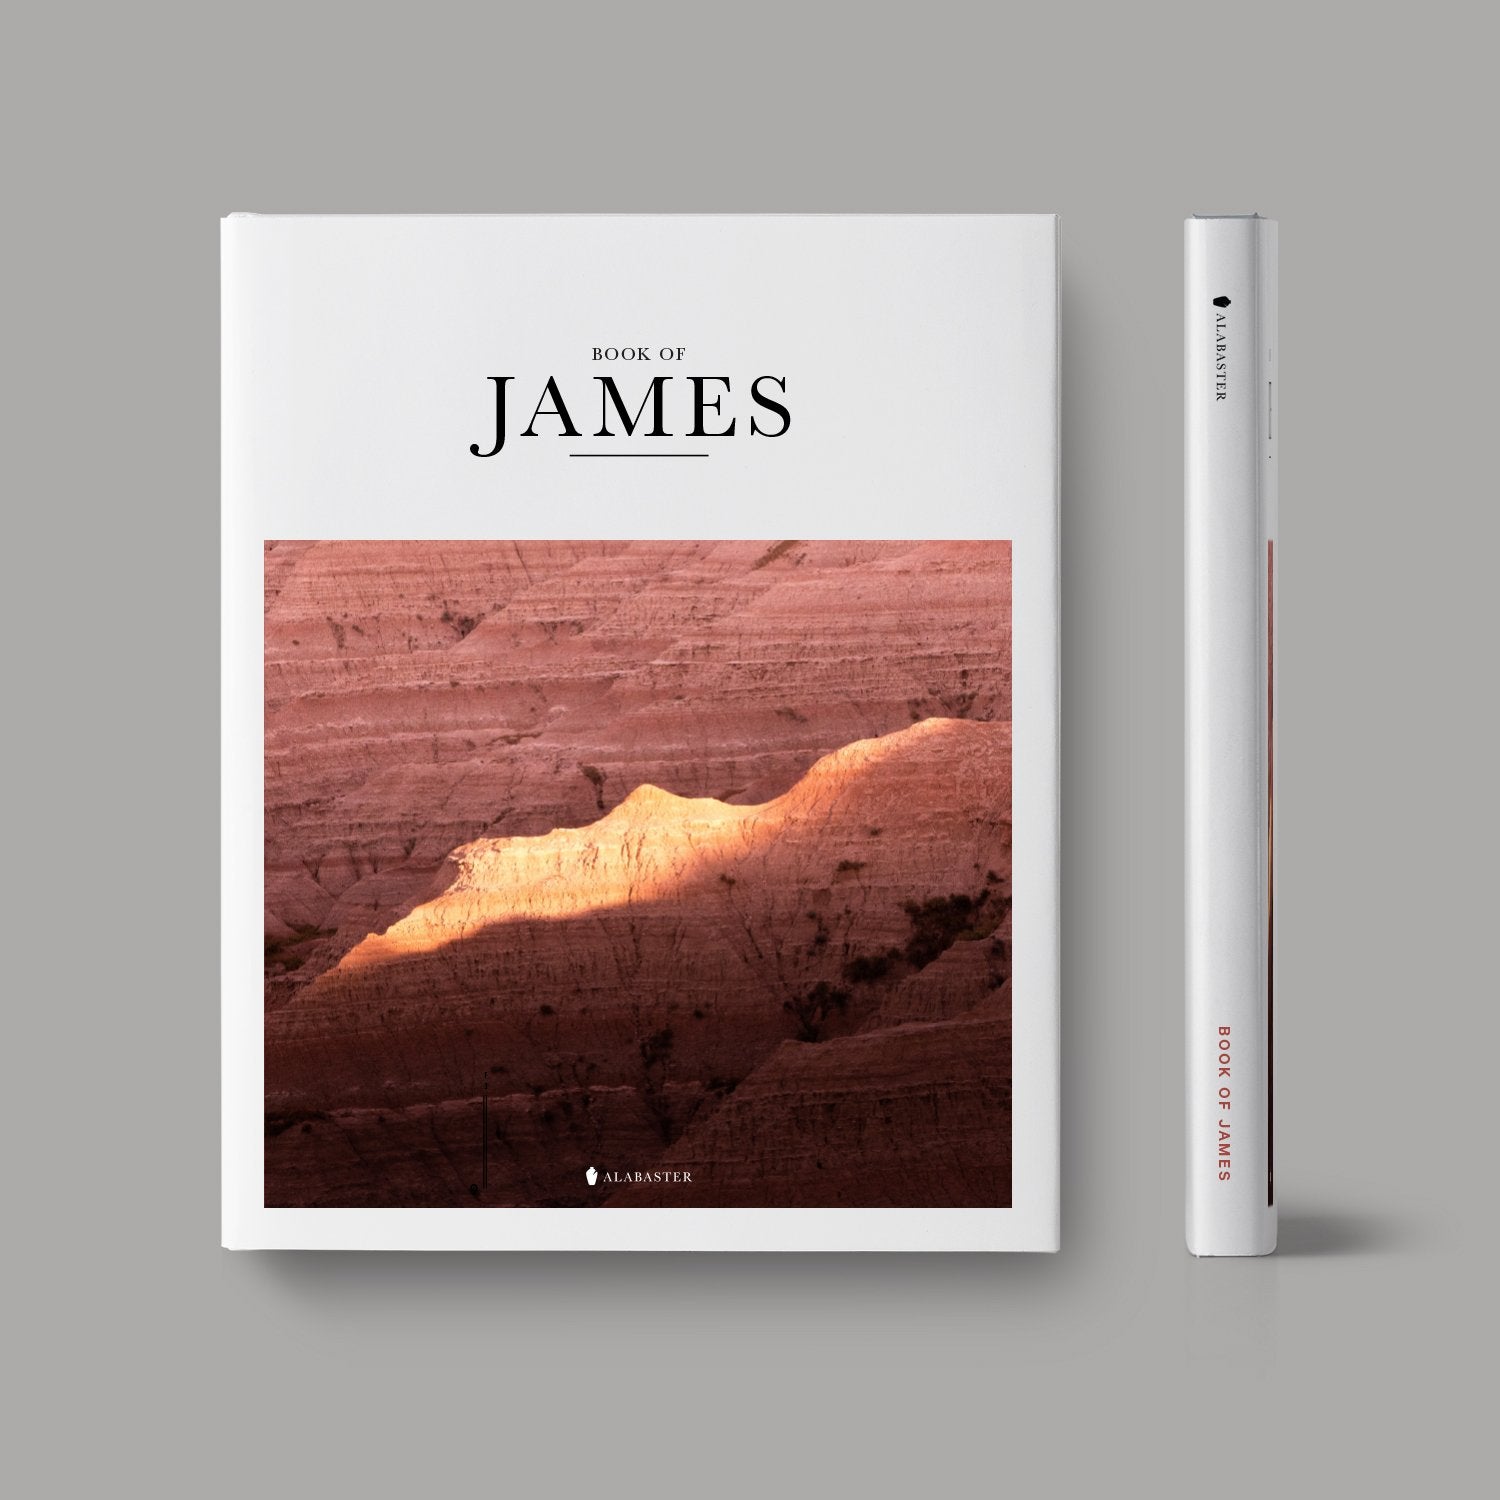 The Book of James hardcover